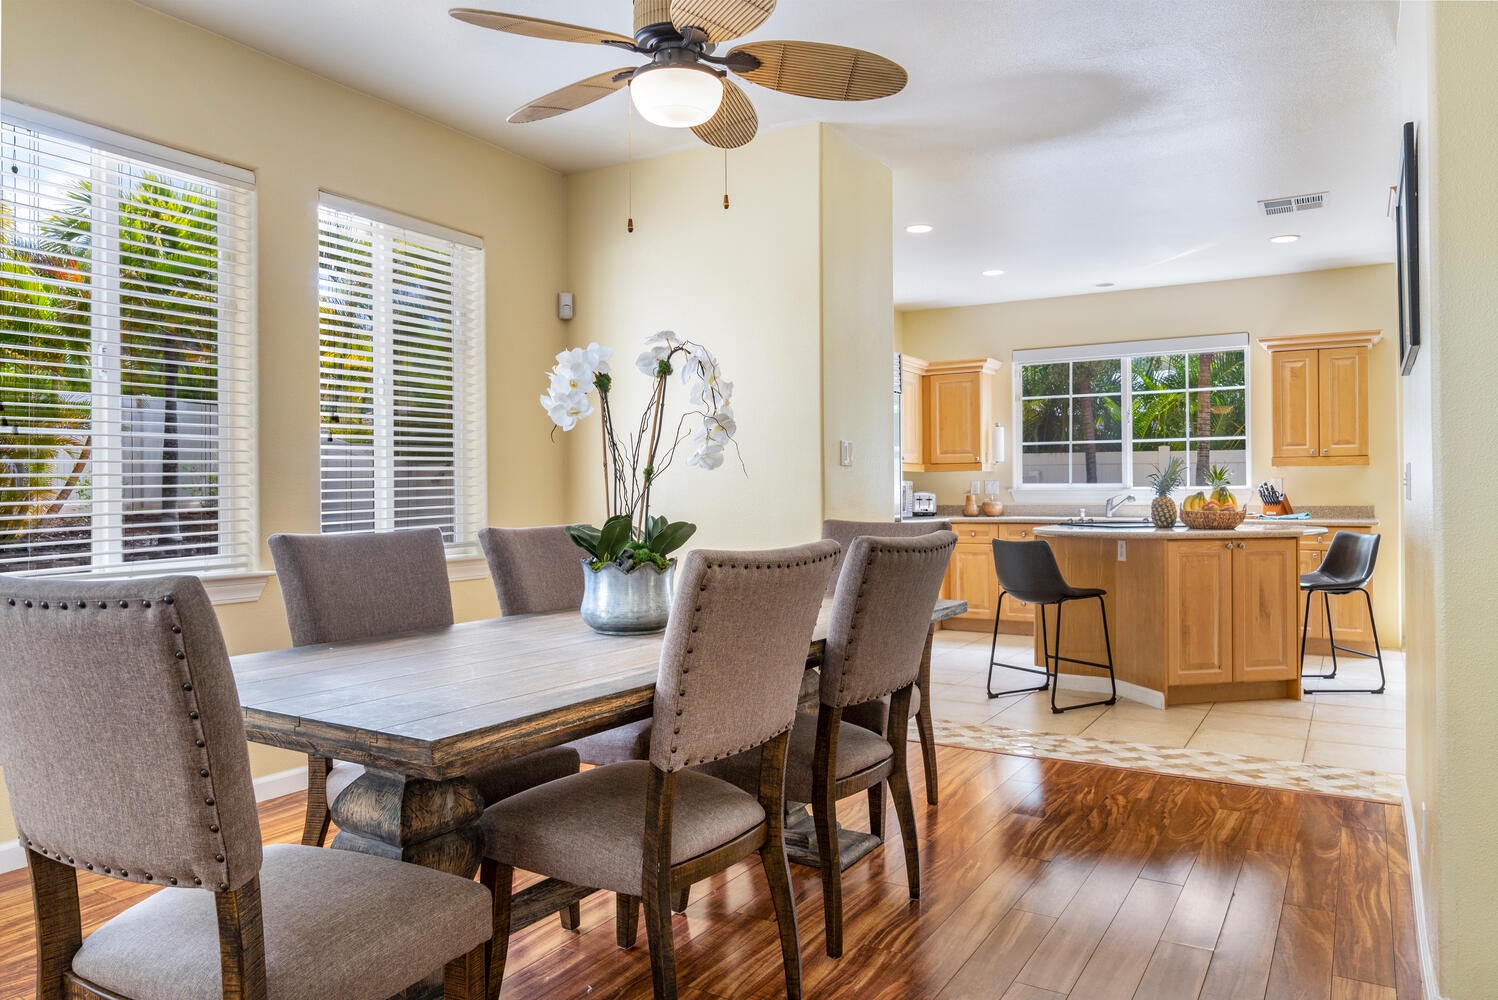 Honolulu Vacation Rentals, Melemele Hale - Dining room with open concept to kitchen